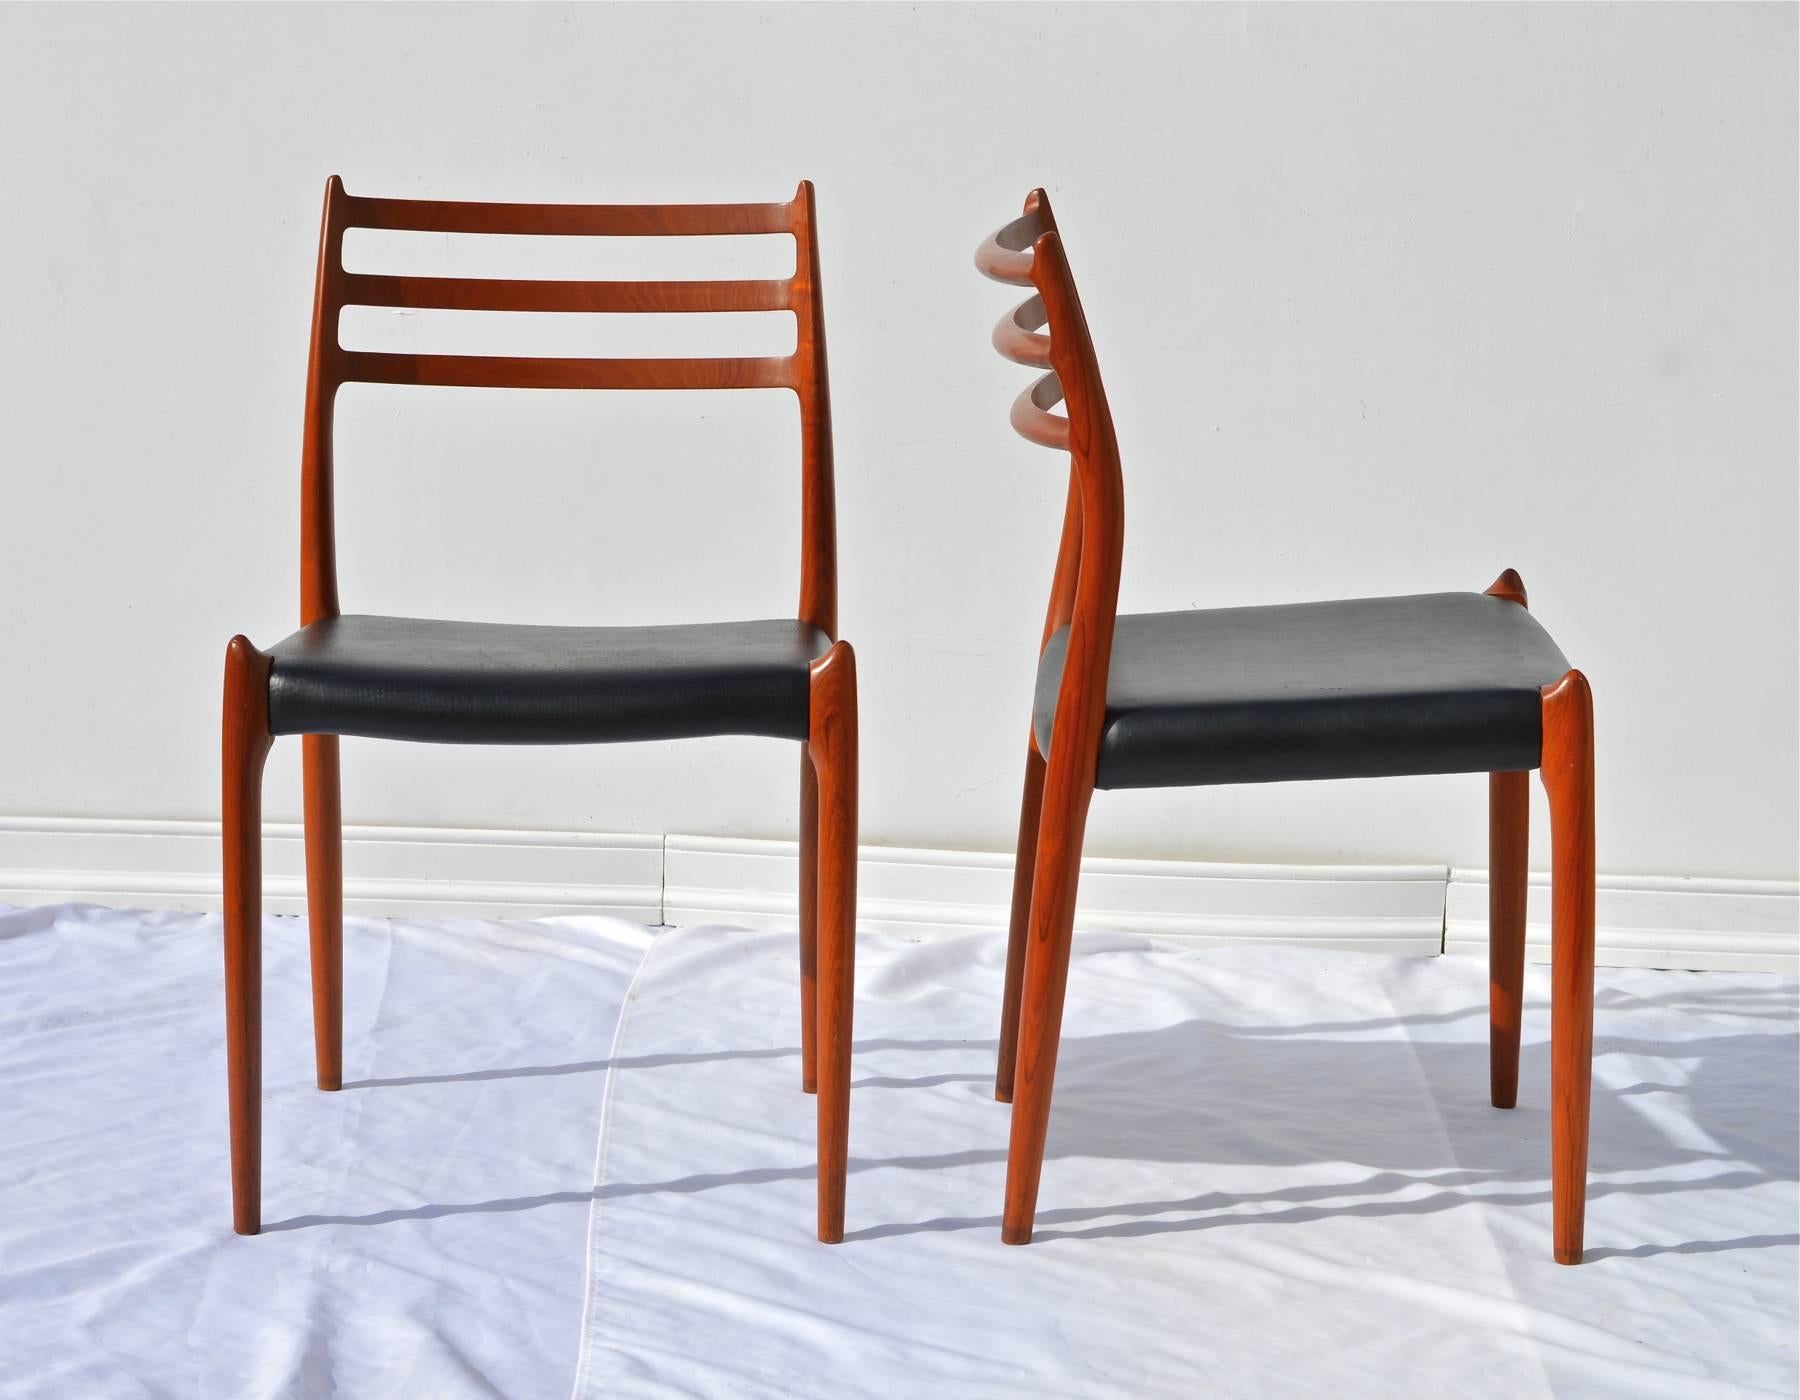 A fine pair of model 78 dining chairs by N.O. Moller. The gorgeous and sculptural Danish modern chairs are in excellent structural condition throughout and possess a richness of woodgrain that set them apart from other teak wood models of this